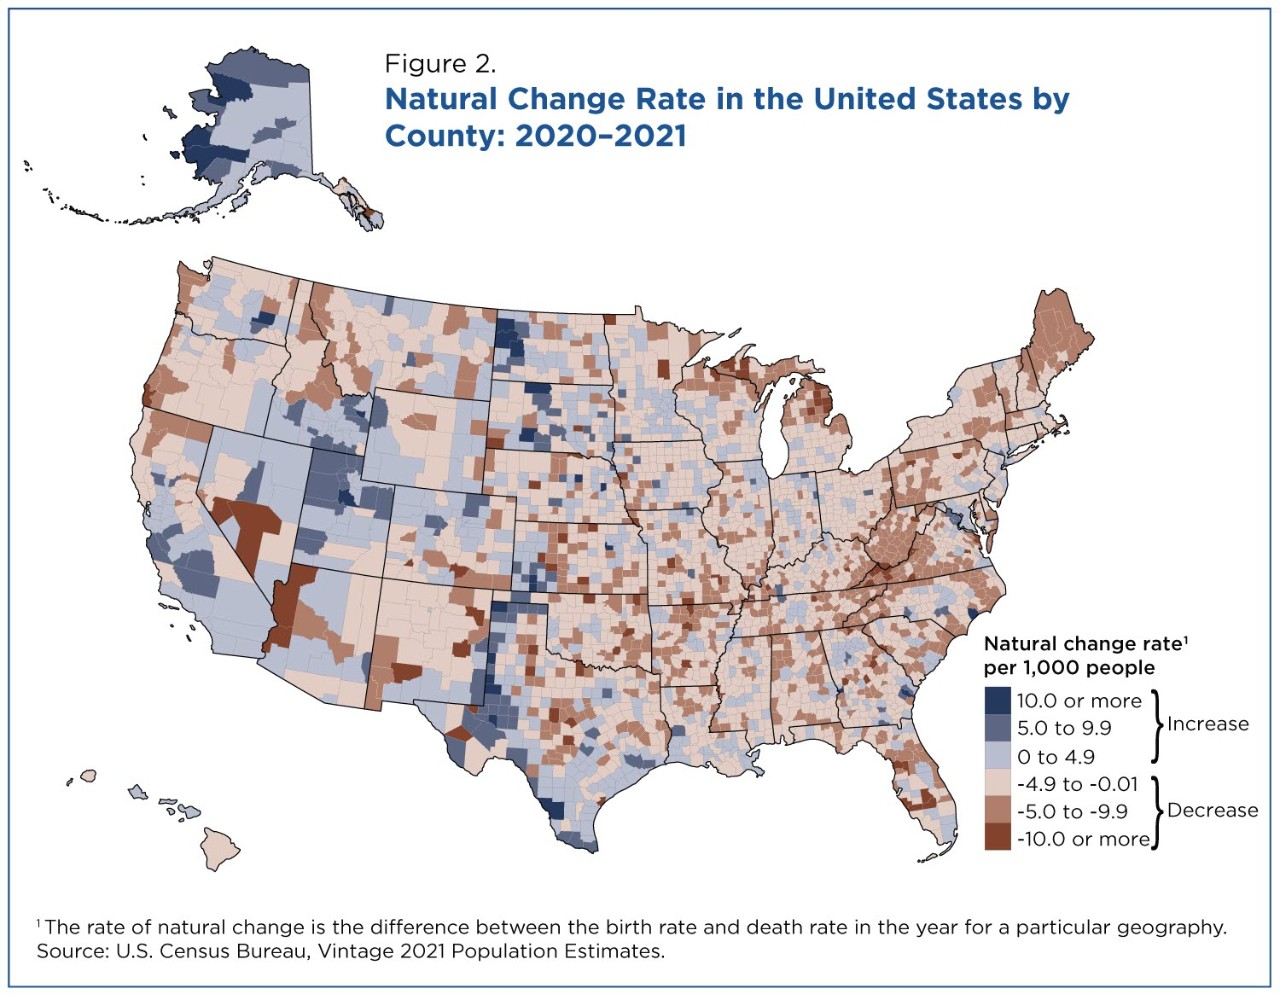 Natural change rate in the United States by county: 2020-2021